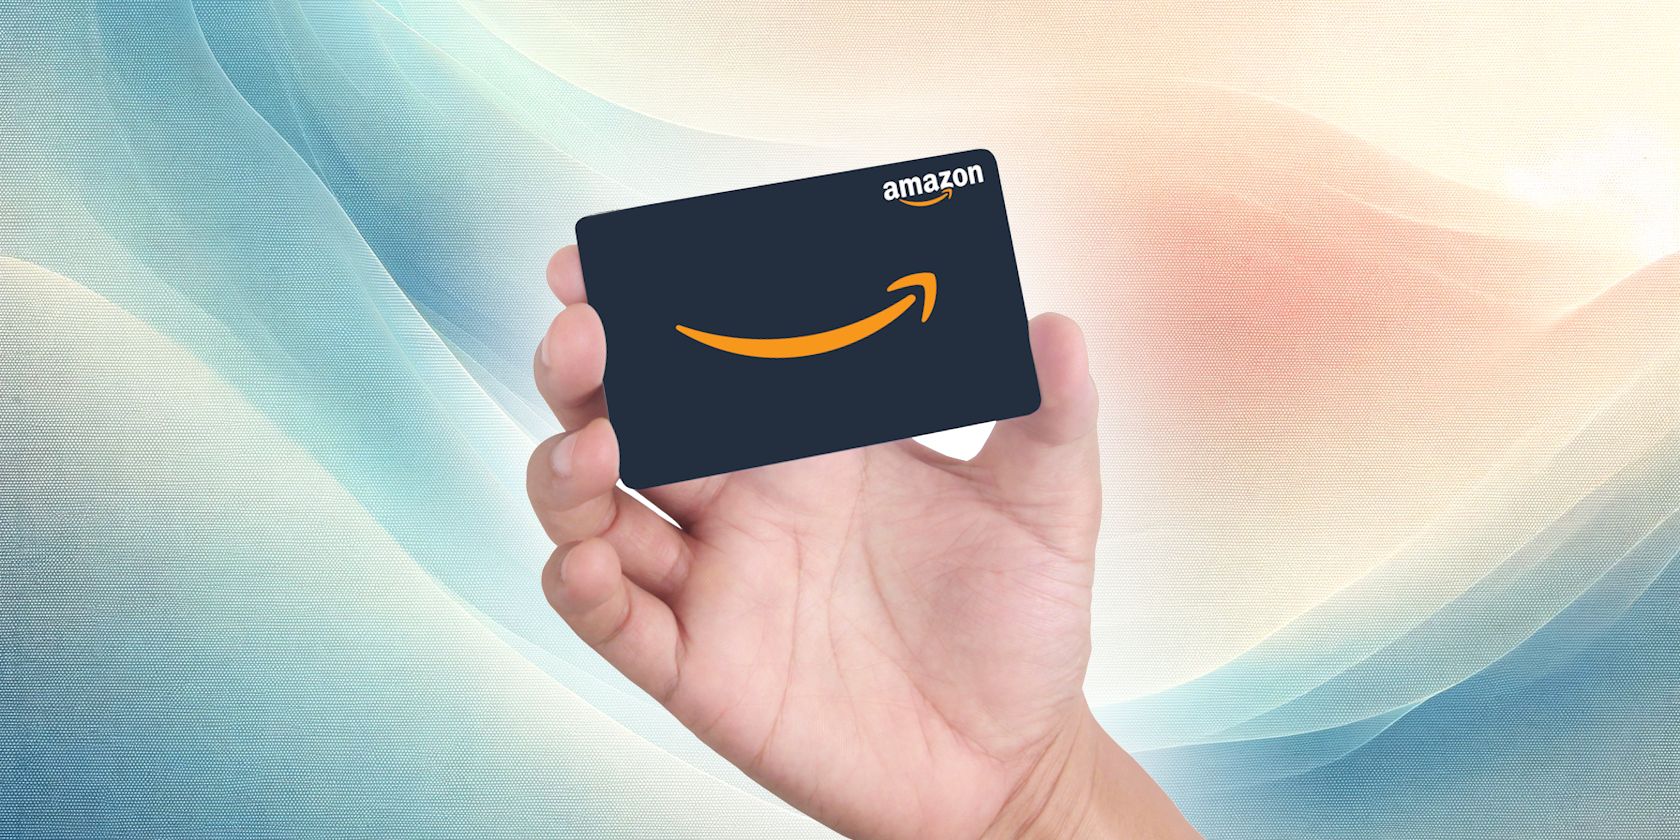 Buy $25 Amazon Gift Card Card - Free with purchase of $250 or more  (amazoncard25)